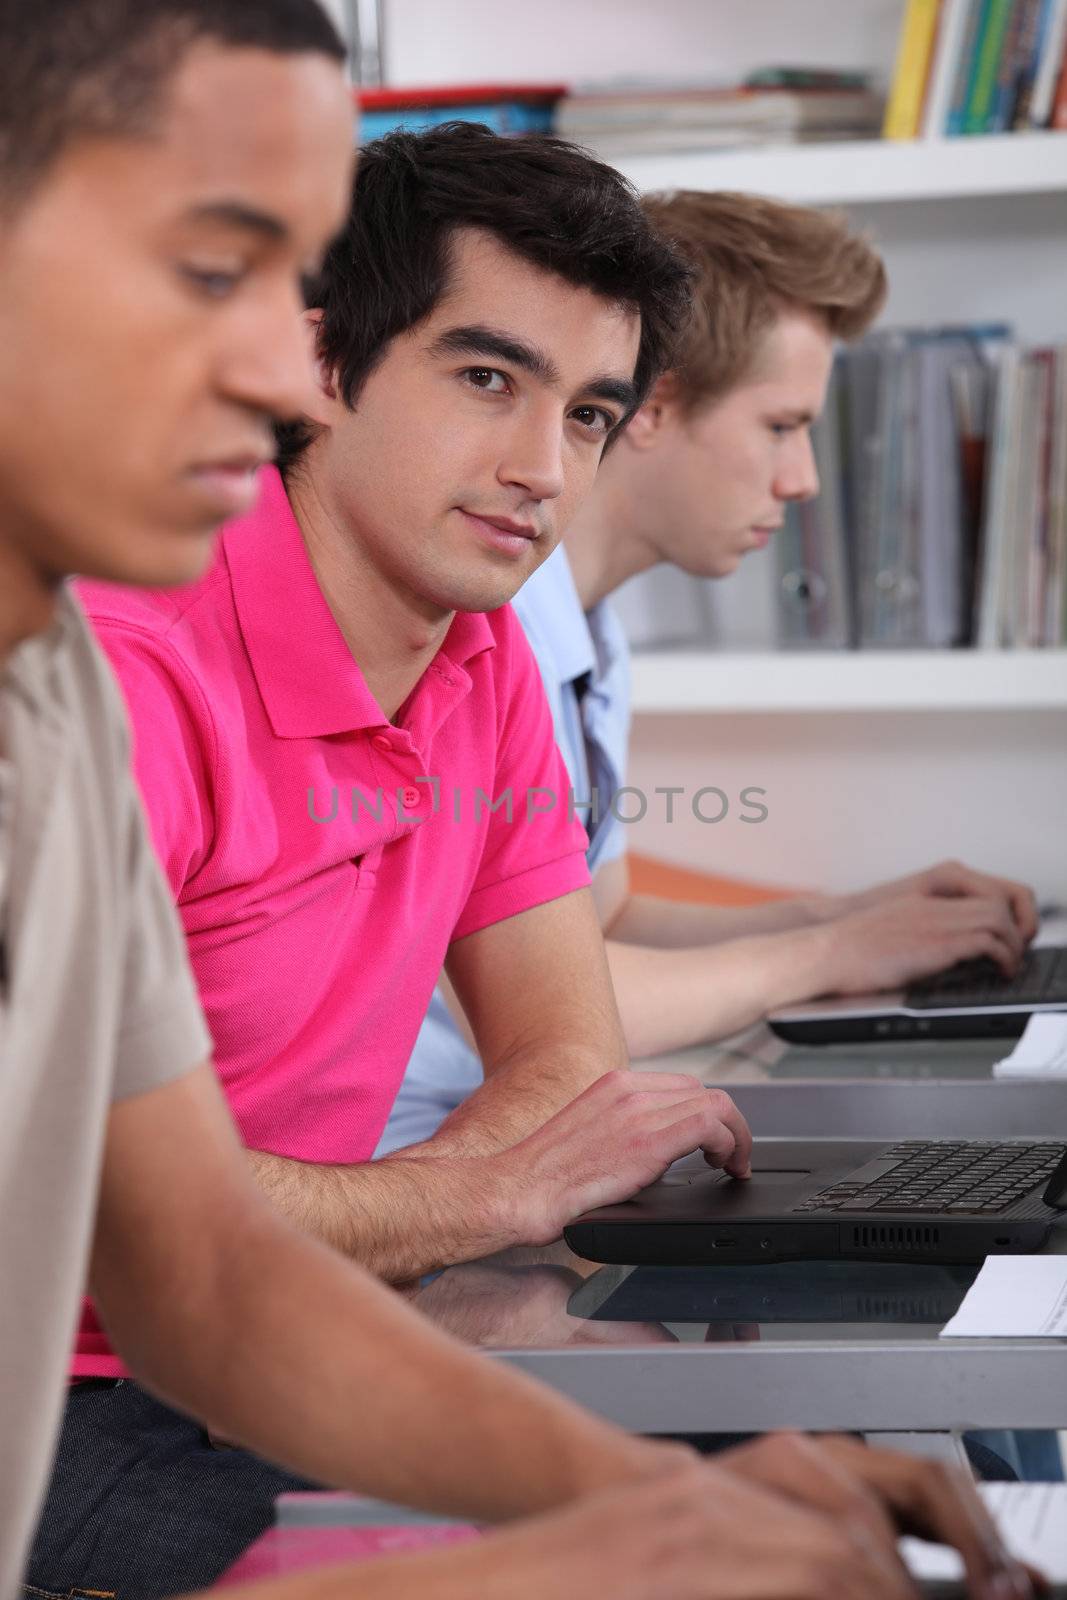 Older students with laptops